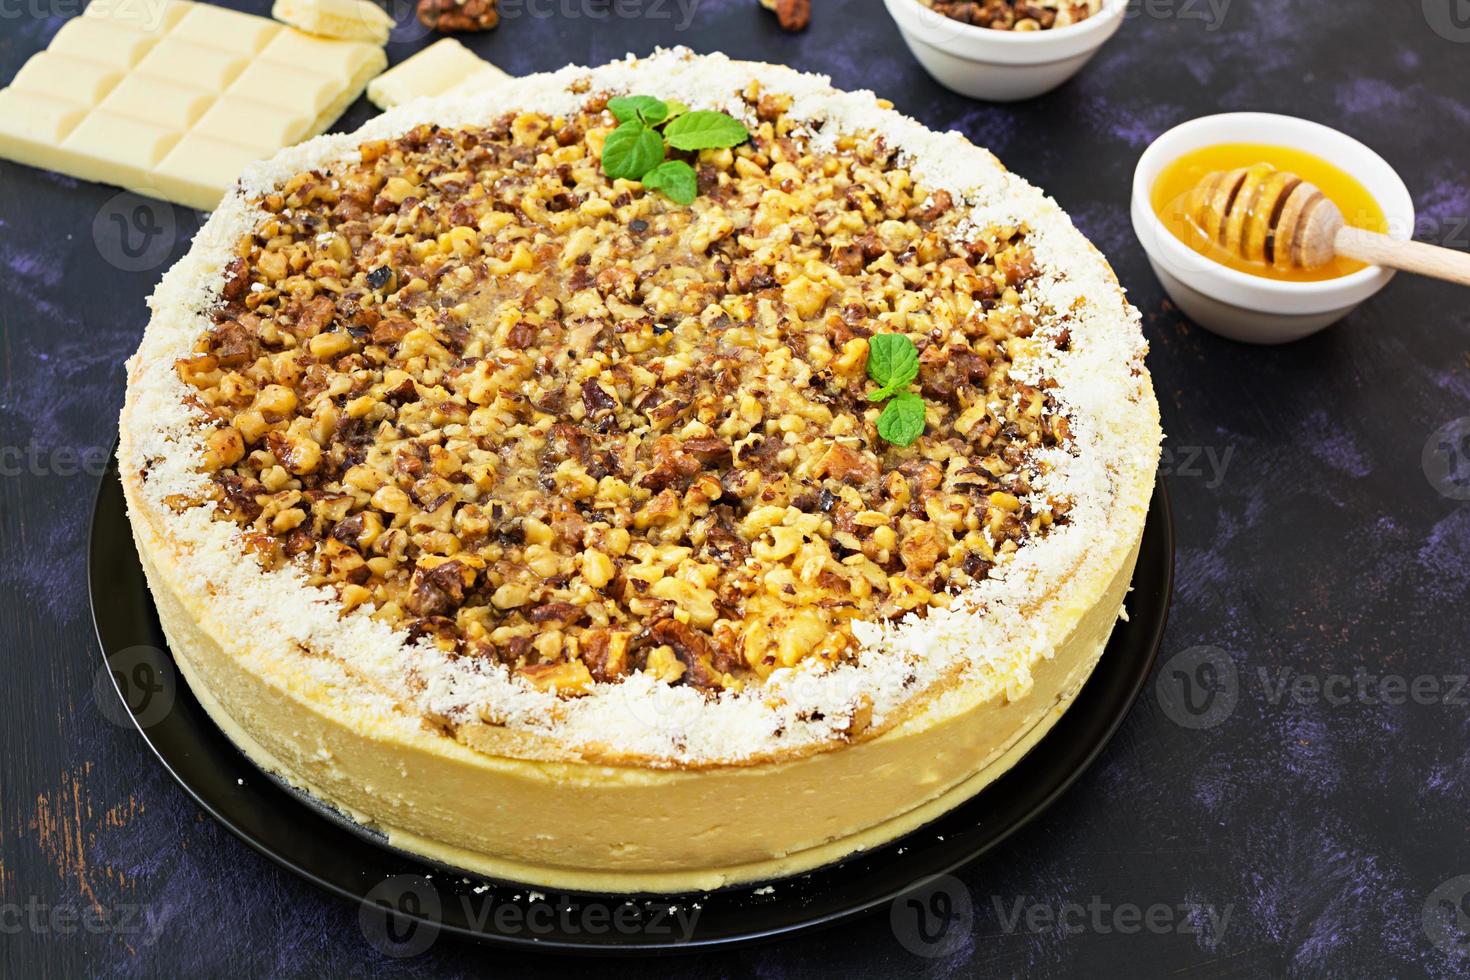 Honey cake with cottage cheese, oranges and nuts, decorated with white chocolate photo